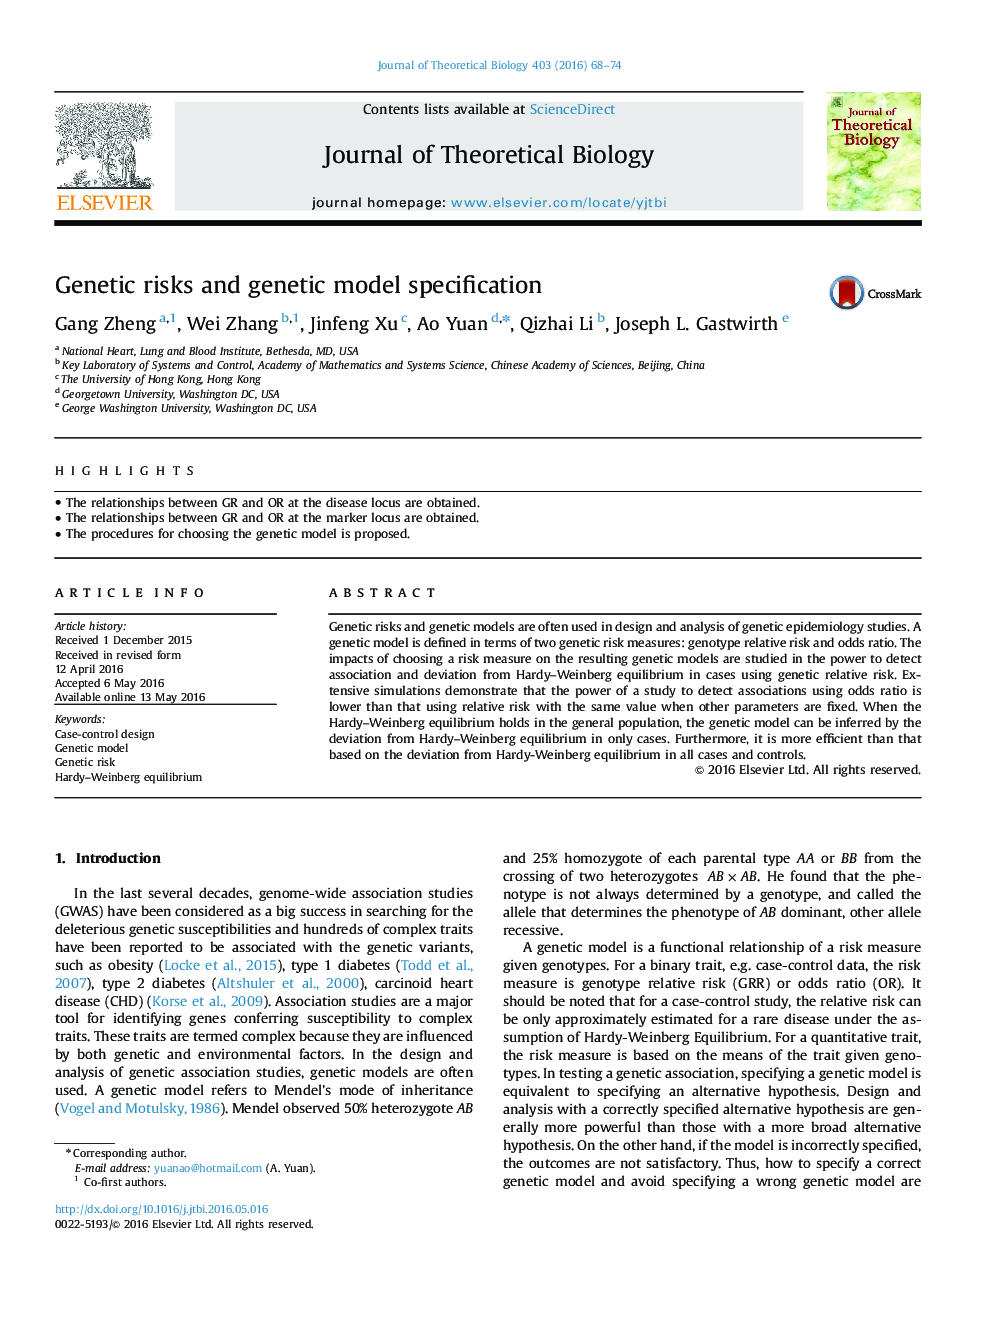 Genetic risks and genetic model specification